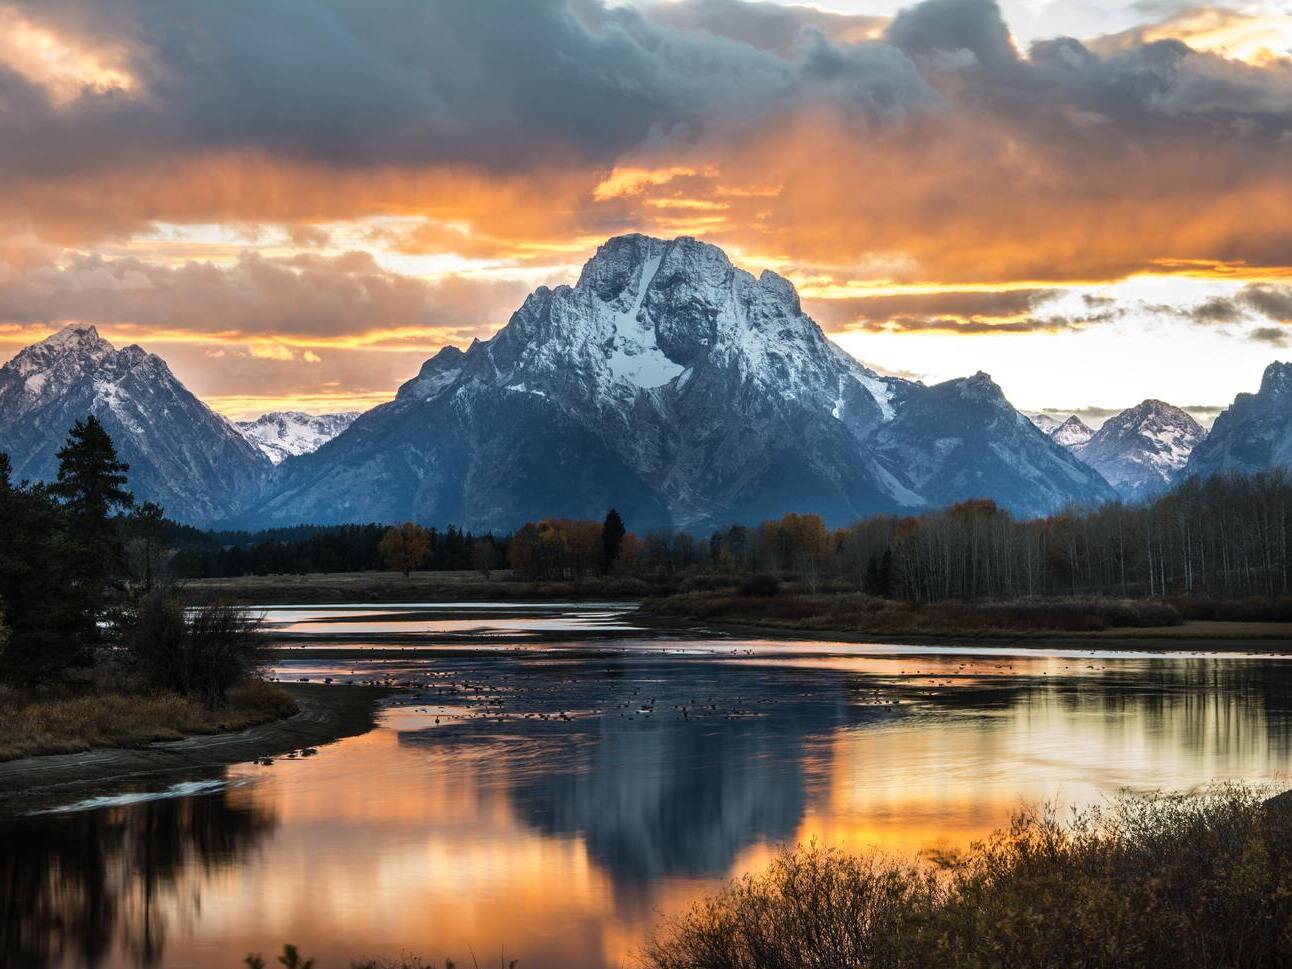 book tickets to visit the famous grand teton national park in wyoming in america